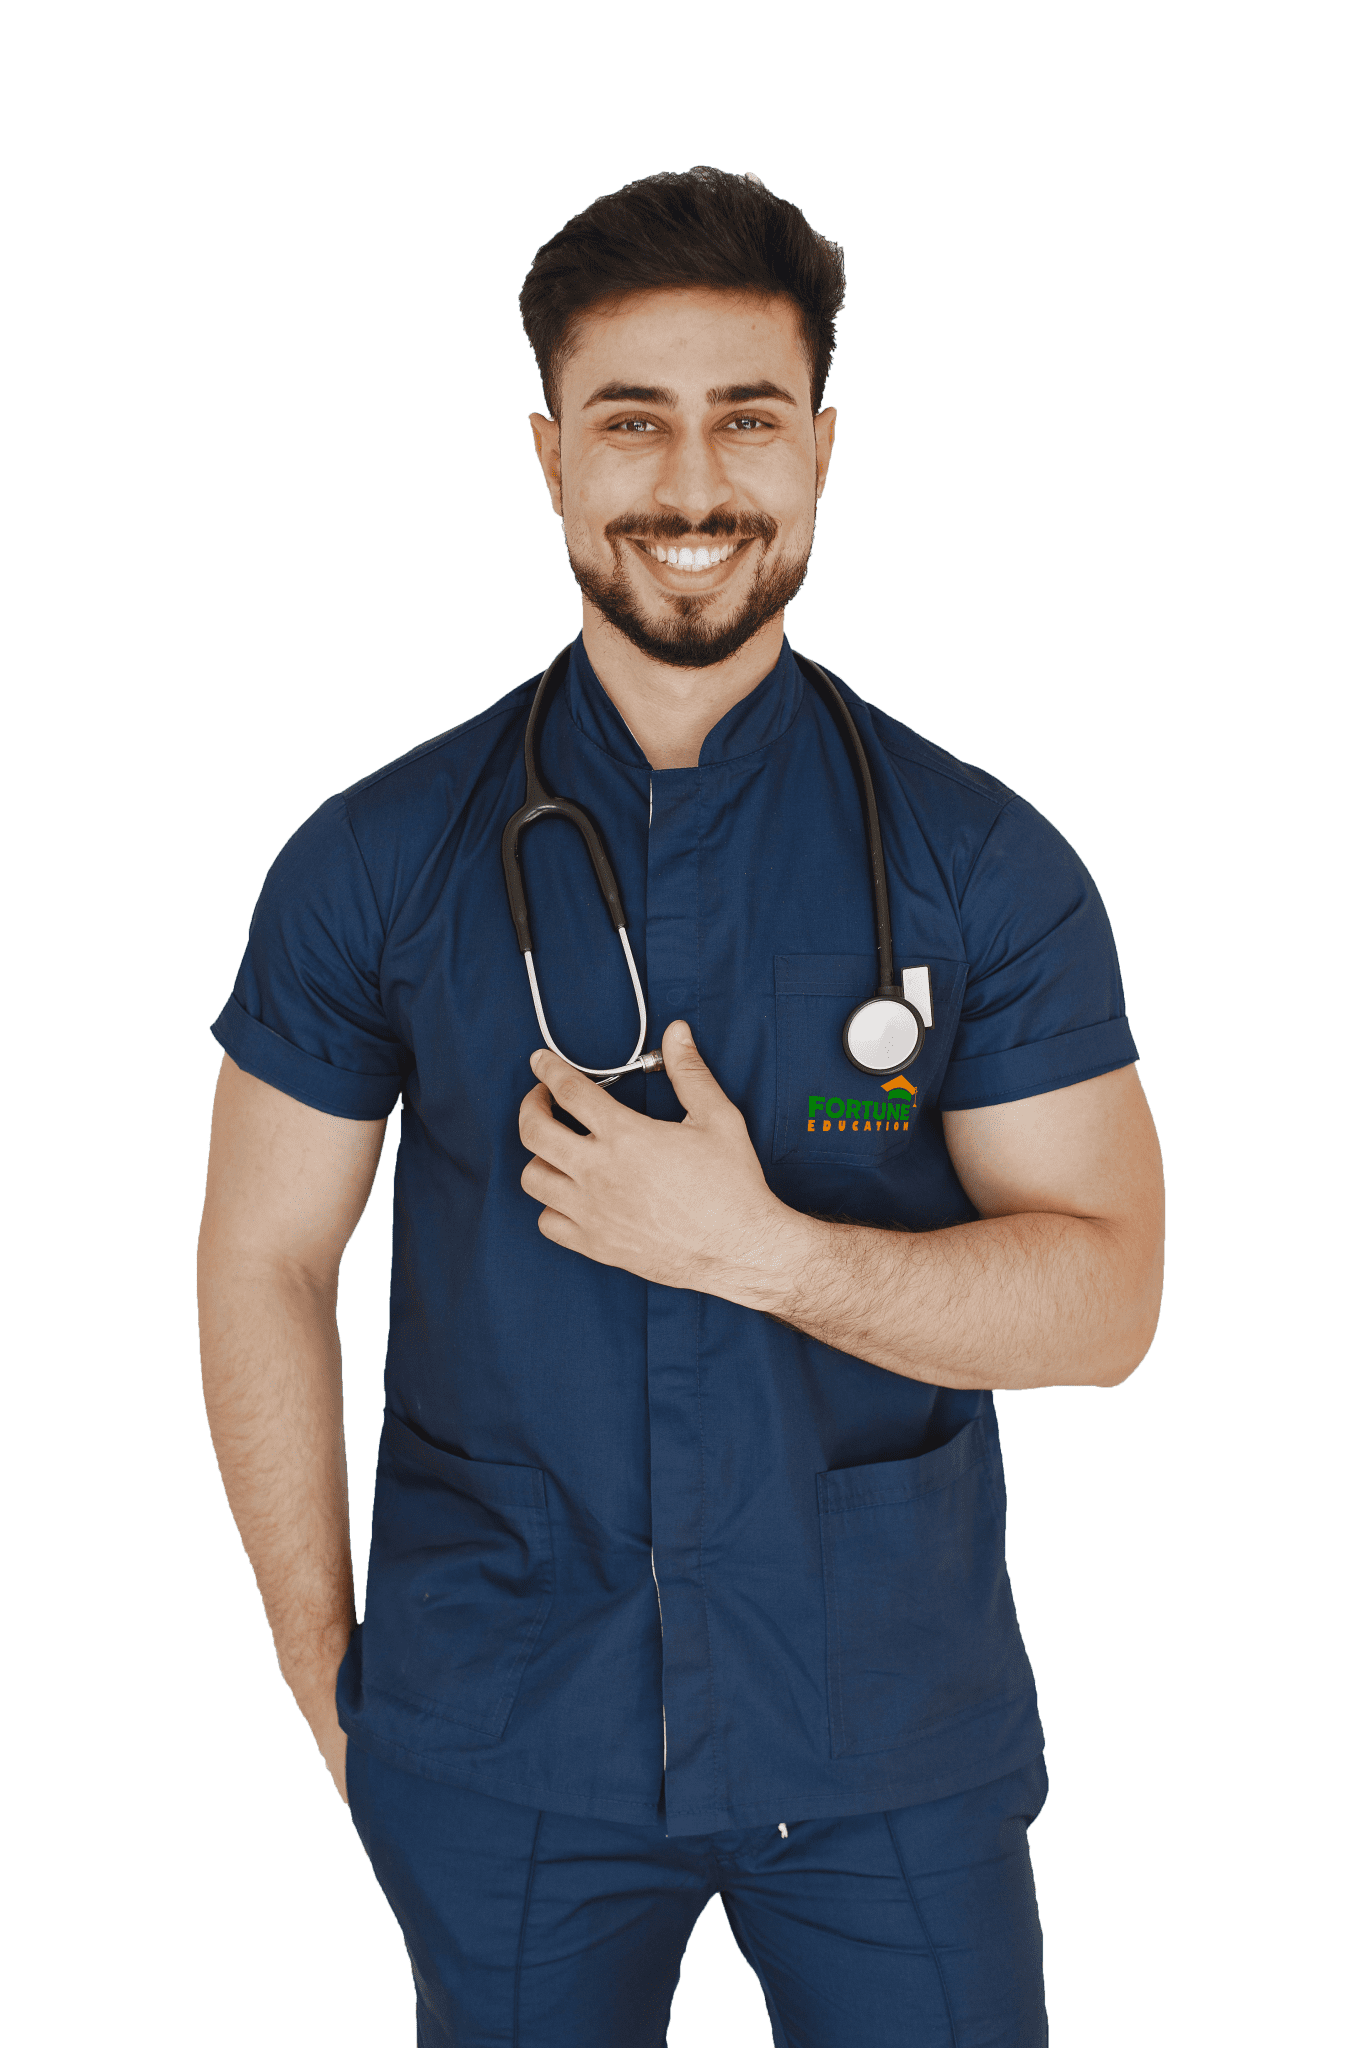 Medical Student With Blue uniform